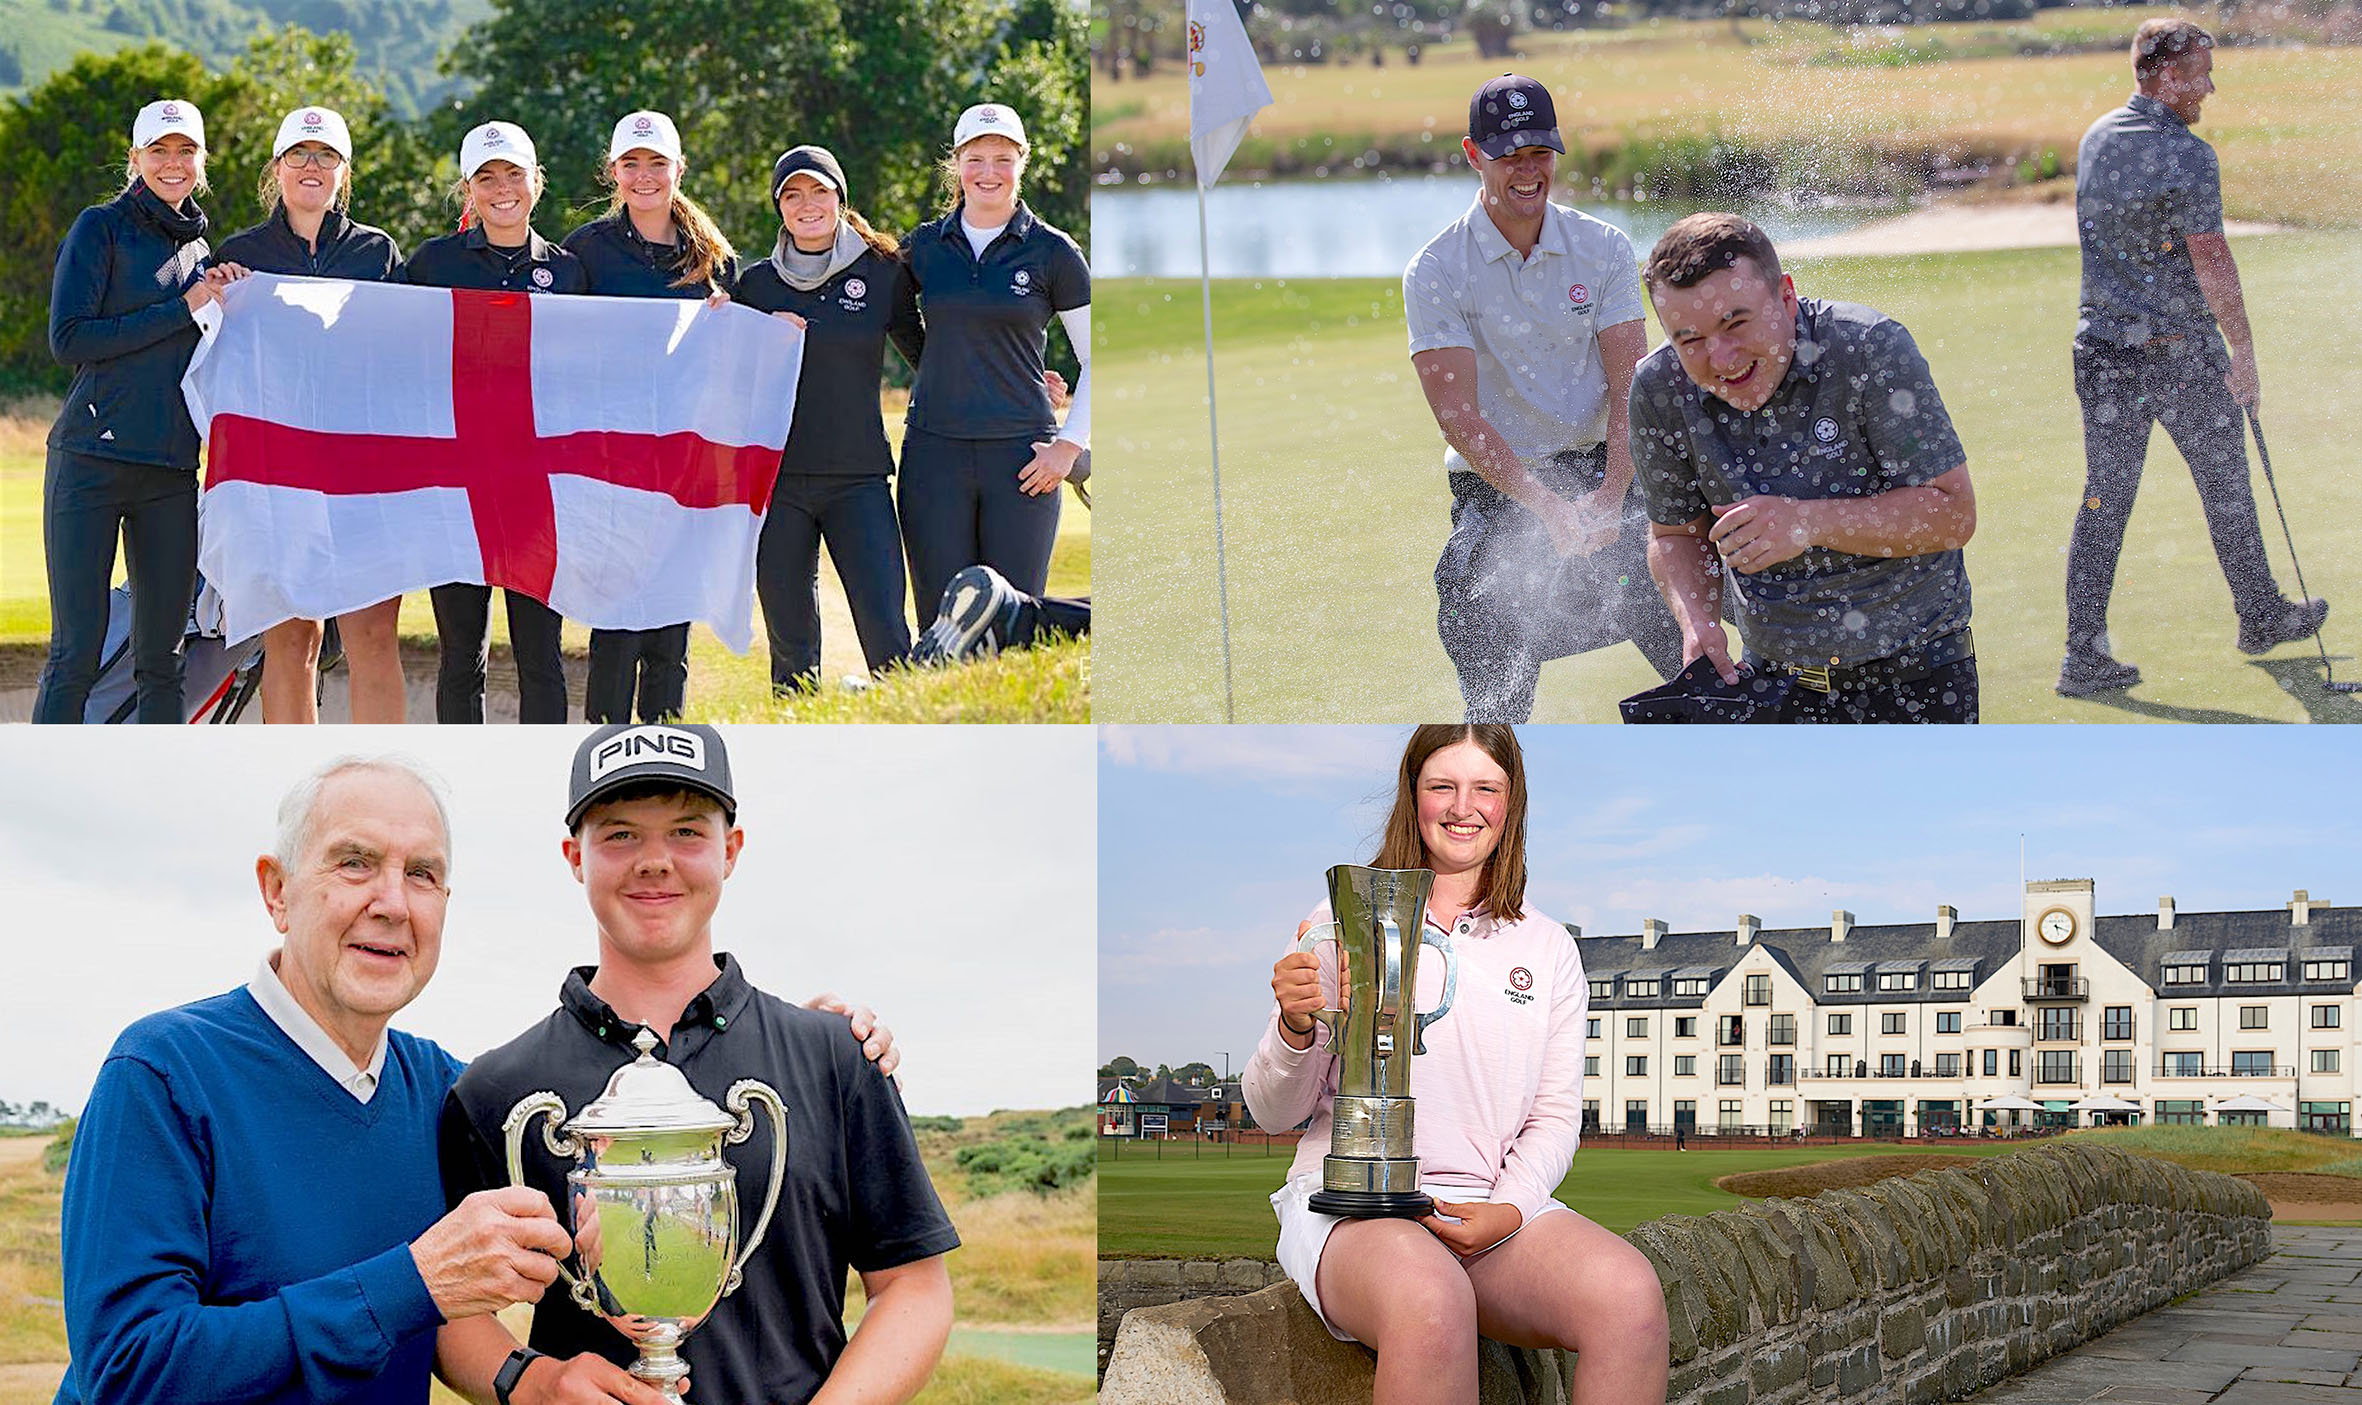 The England Women's team at Conwy, John Gough at the Spanish Amateur, Dylan Shaw-Radford at the England Boys and Lottie Woad with the British Girls